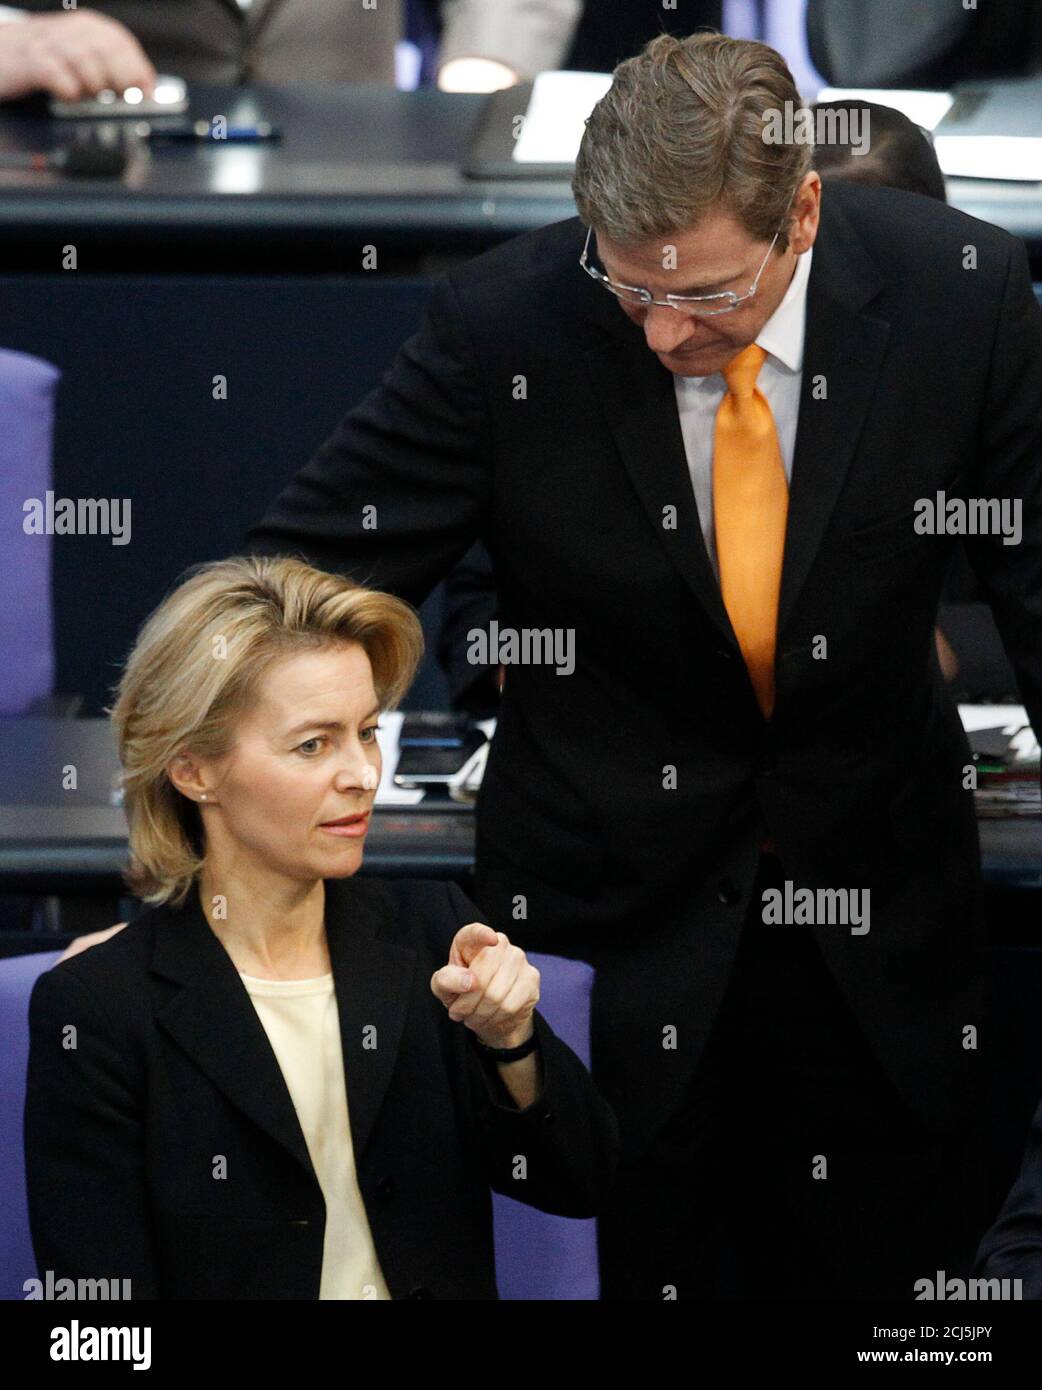 German Foreign Minister and Vice-Chancellor Guido Westerwelle (R) talks with Labour Minister Ursula von der Leyen before debate about the Hartz VI unemployment benefits in the Bundestag lower house of parliament in Berlin February 25, 2010.  REUTERS/Thomas Peter (GERMANY - Tags: POLITICS) Stock Photo